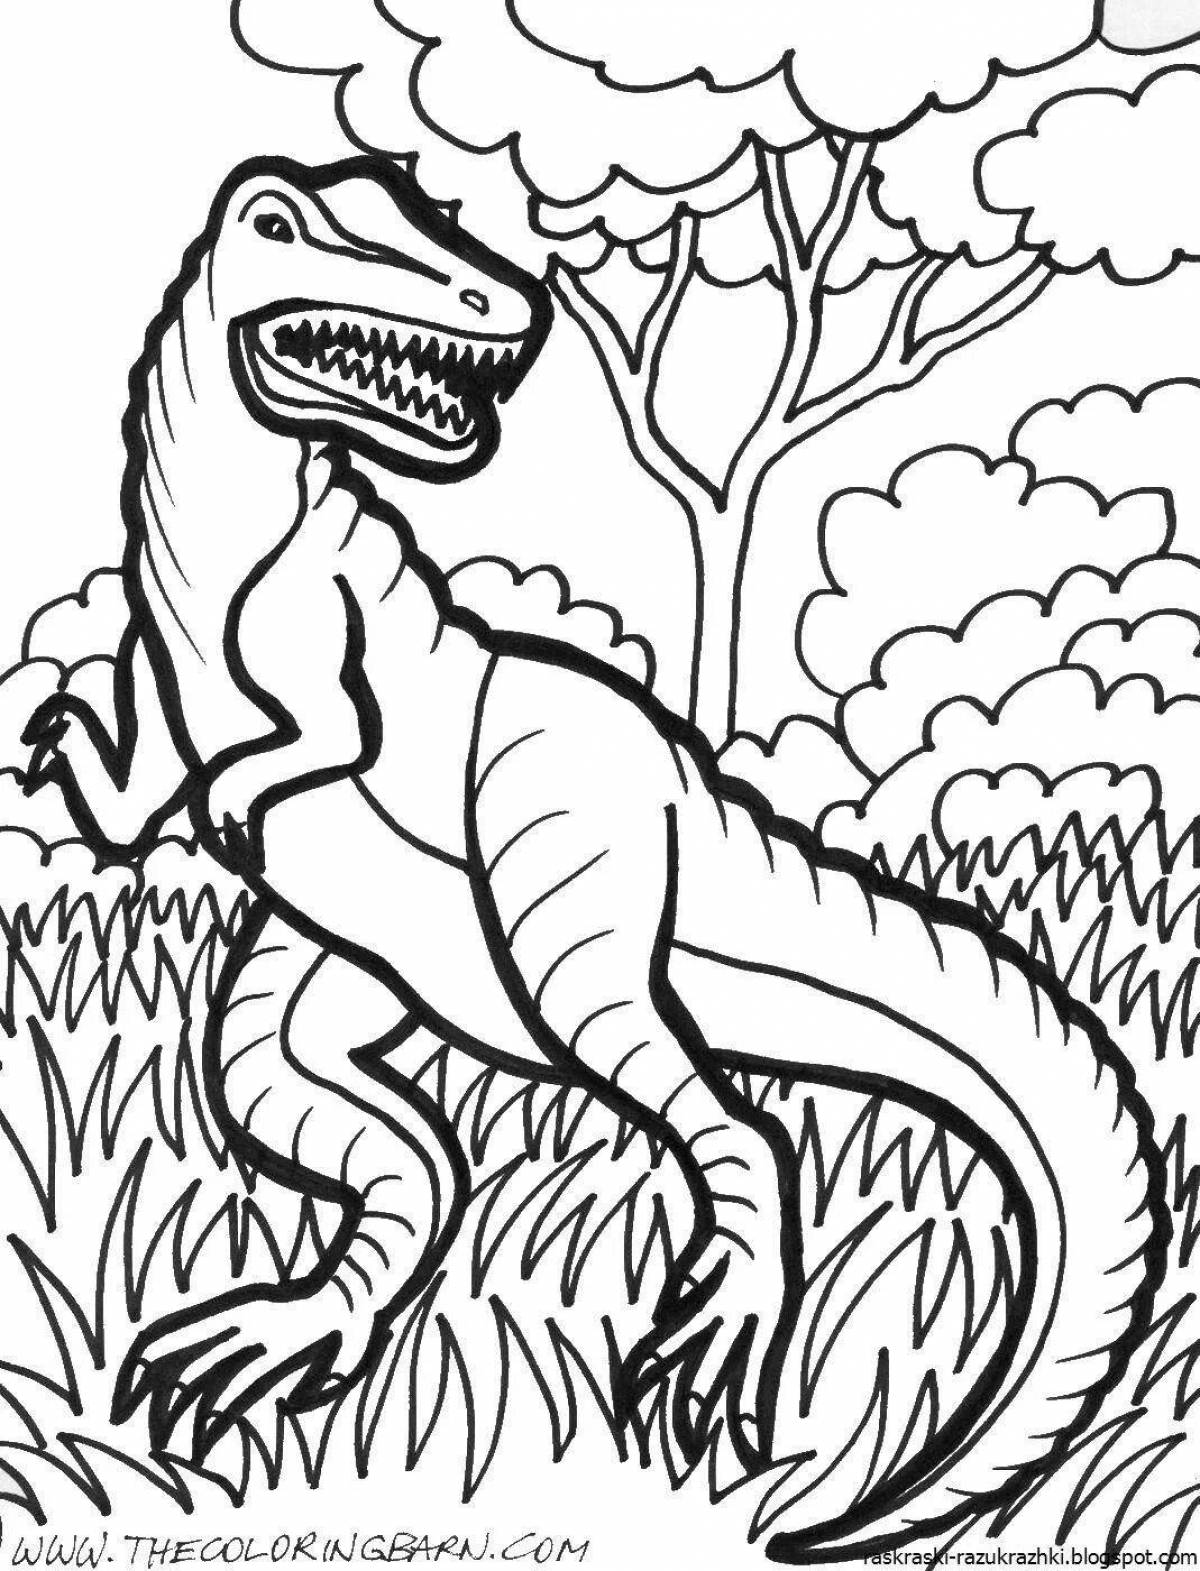 Fabulous dinosaurs coloring for children 7 years old